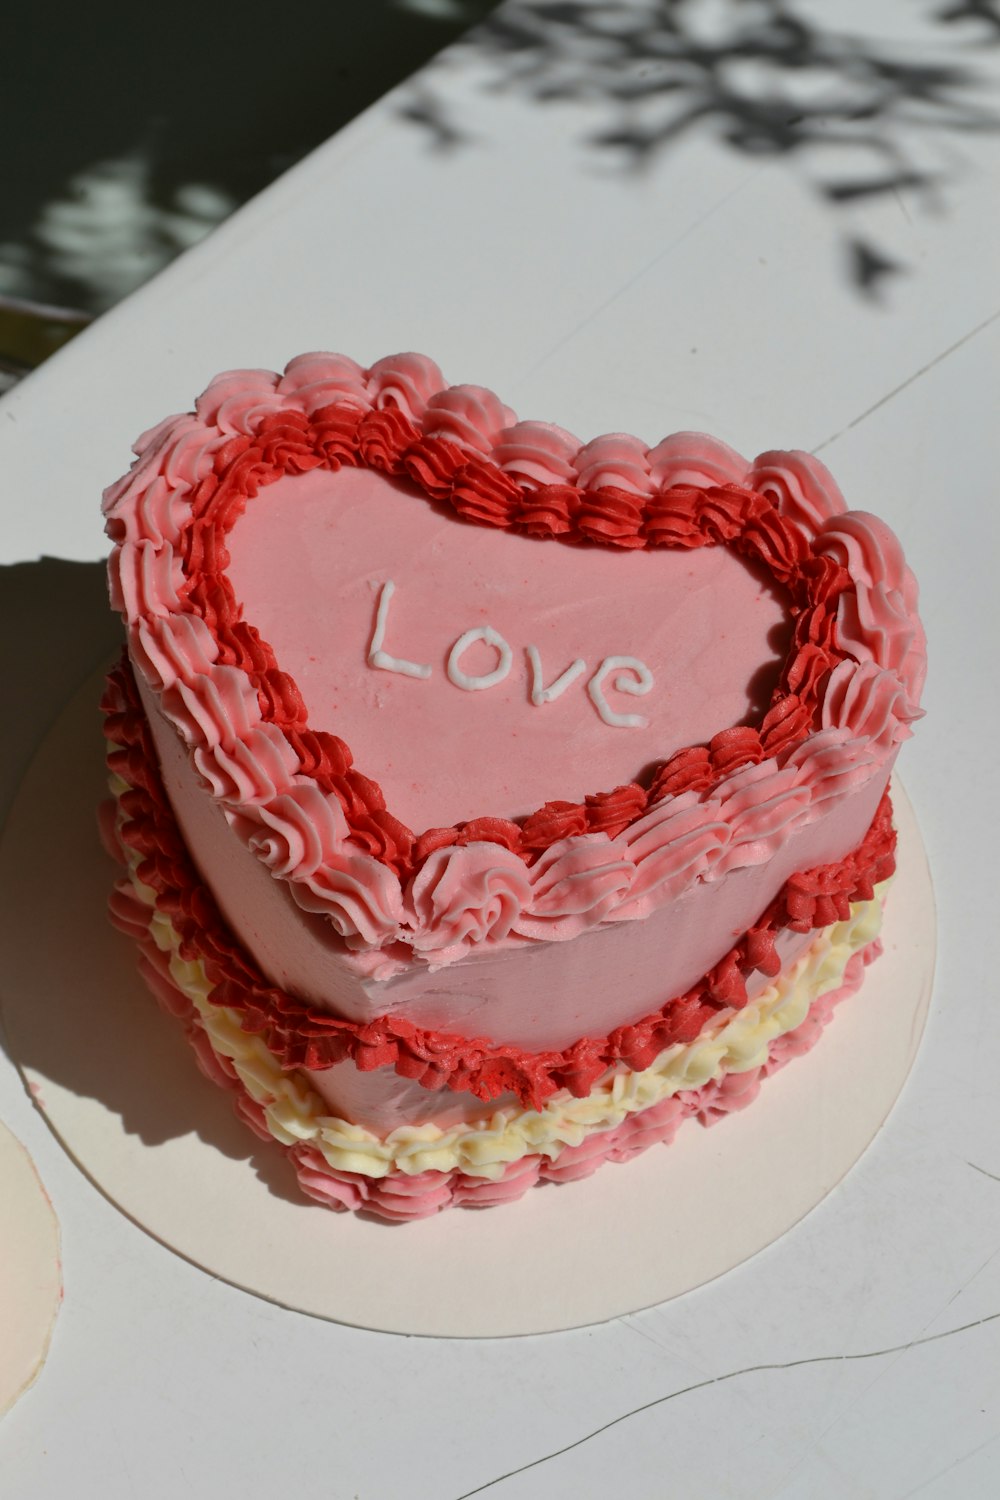 a cake with a red frosting